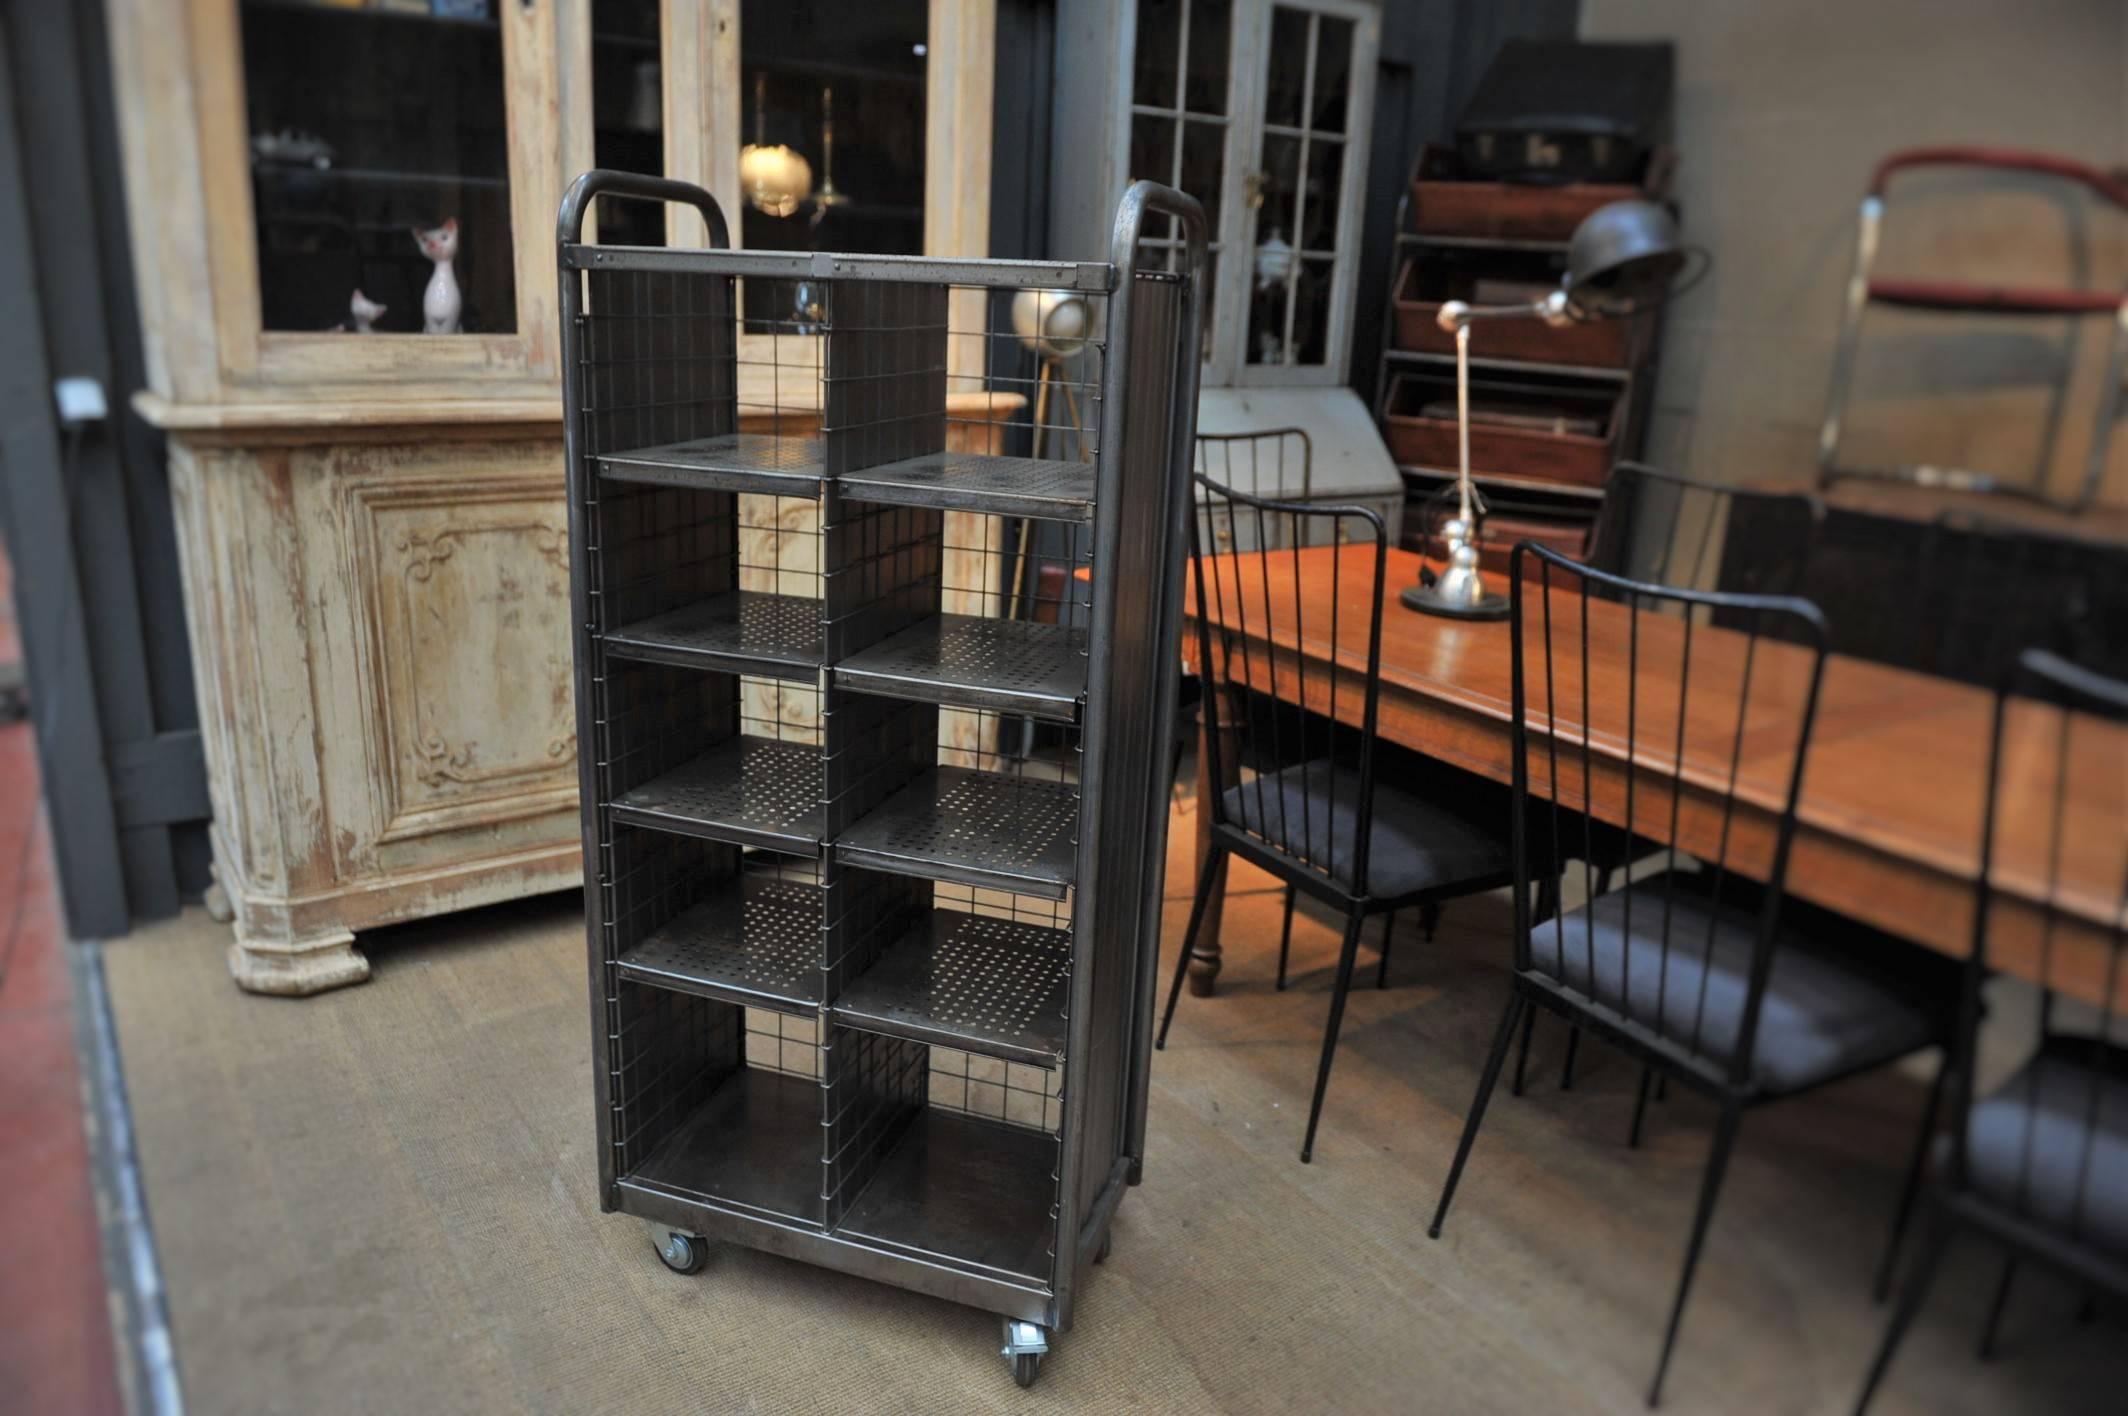 One to four French poste Industrial shelves. Each inside shelves are adjustable and removable very easily. Polished and mat varnish finish, circa 1950.

